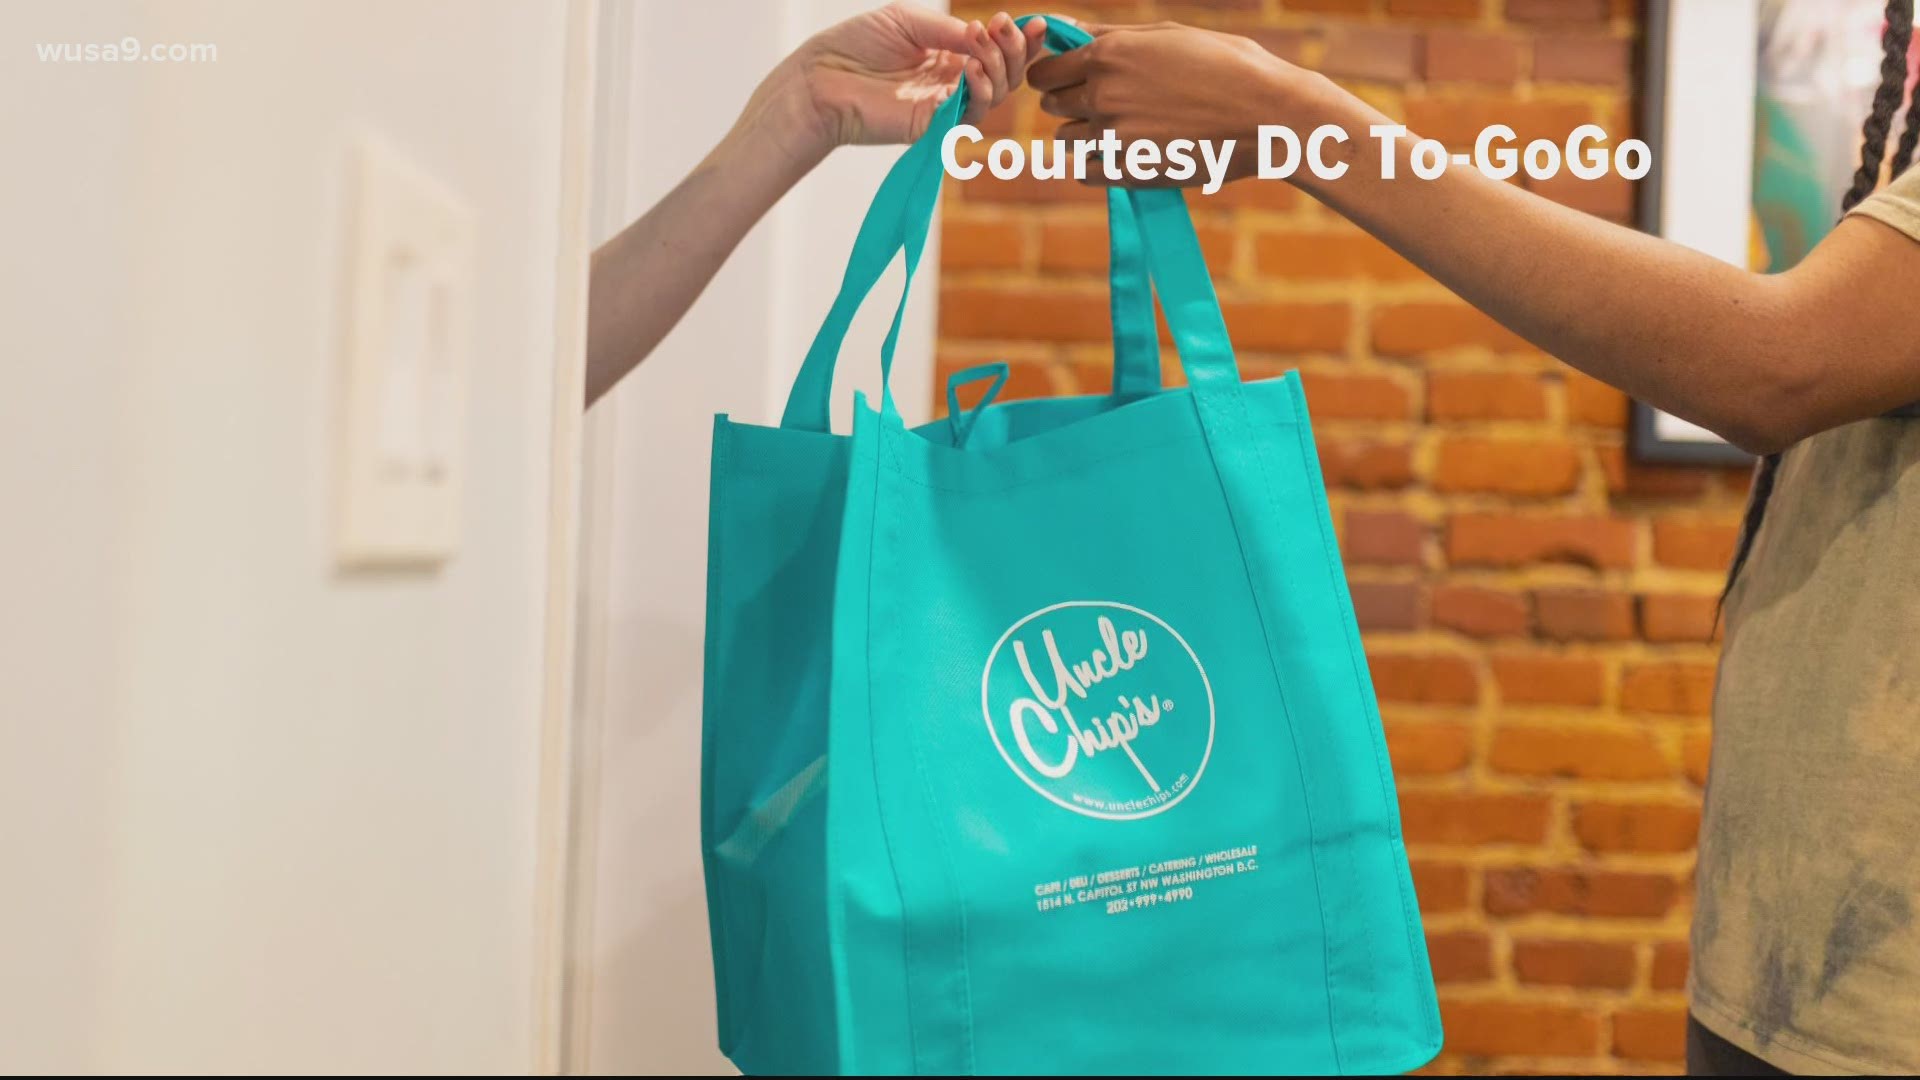 The founders of DC To-GoGo share why they started a new restaurant delivery service from their own experience running an eatery during the pandemic.